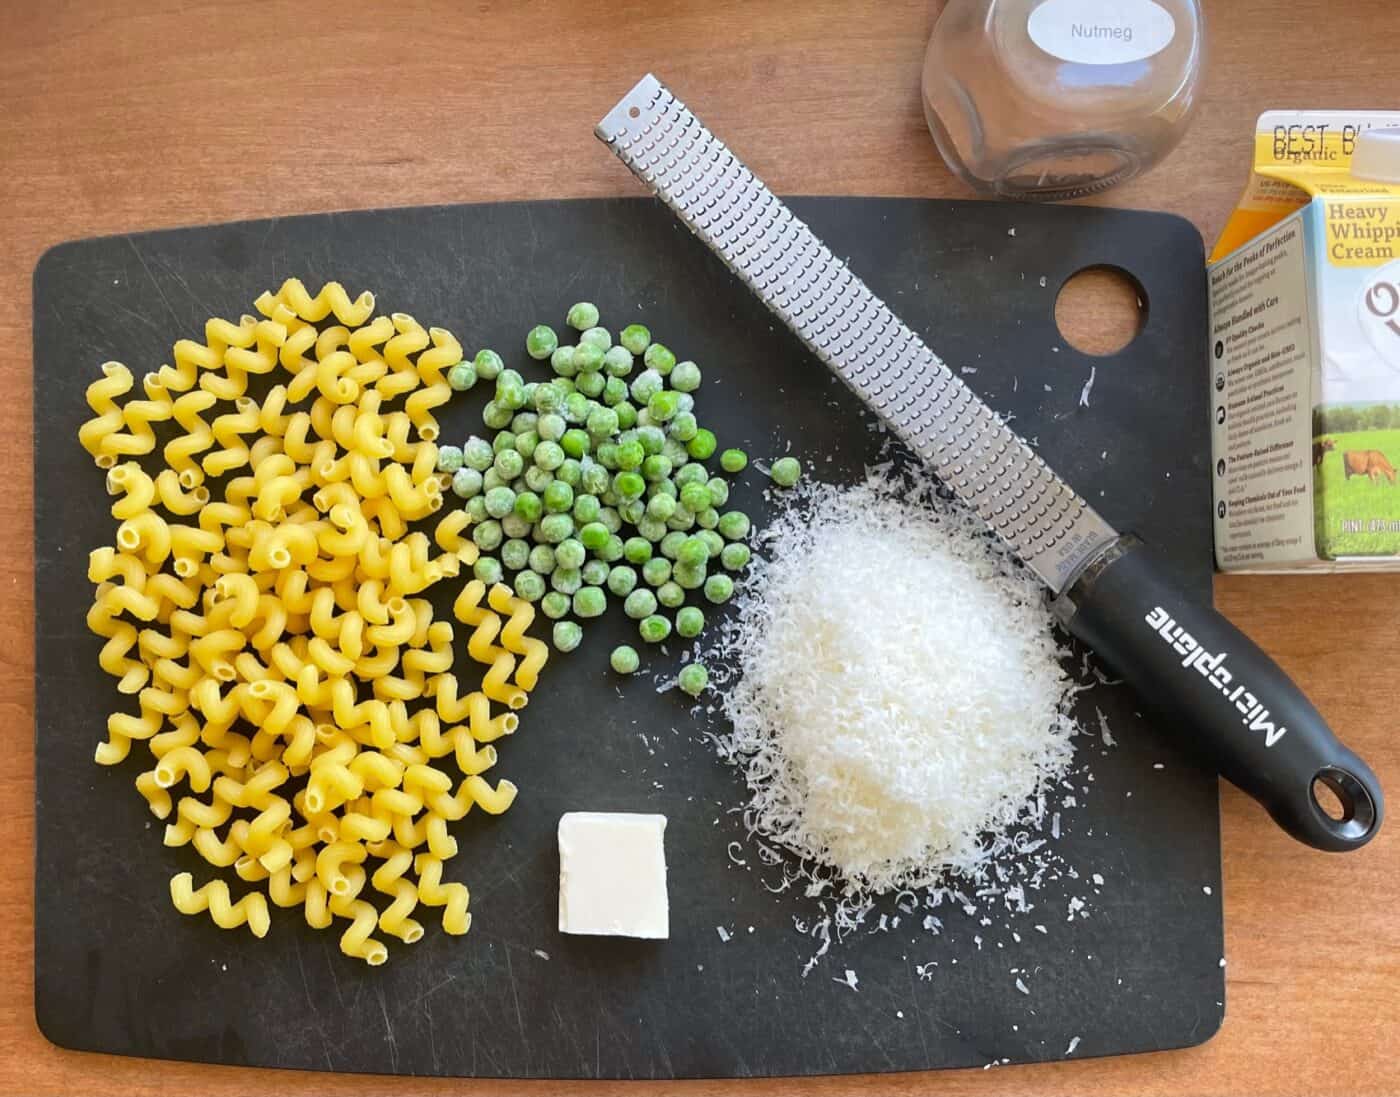 cavatappi, butter, cream, Parmesan and other ingredients for the cavatappi alfredo recipe.